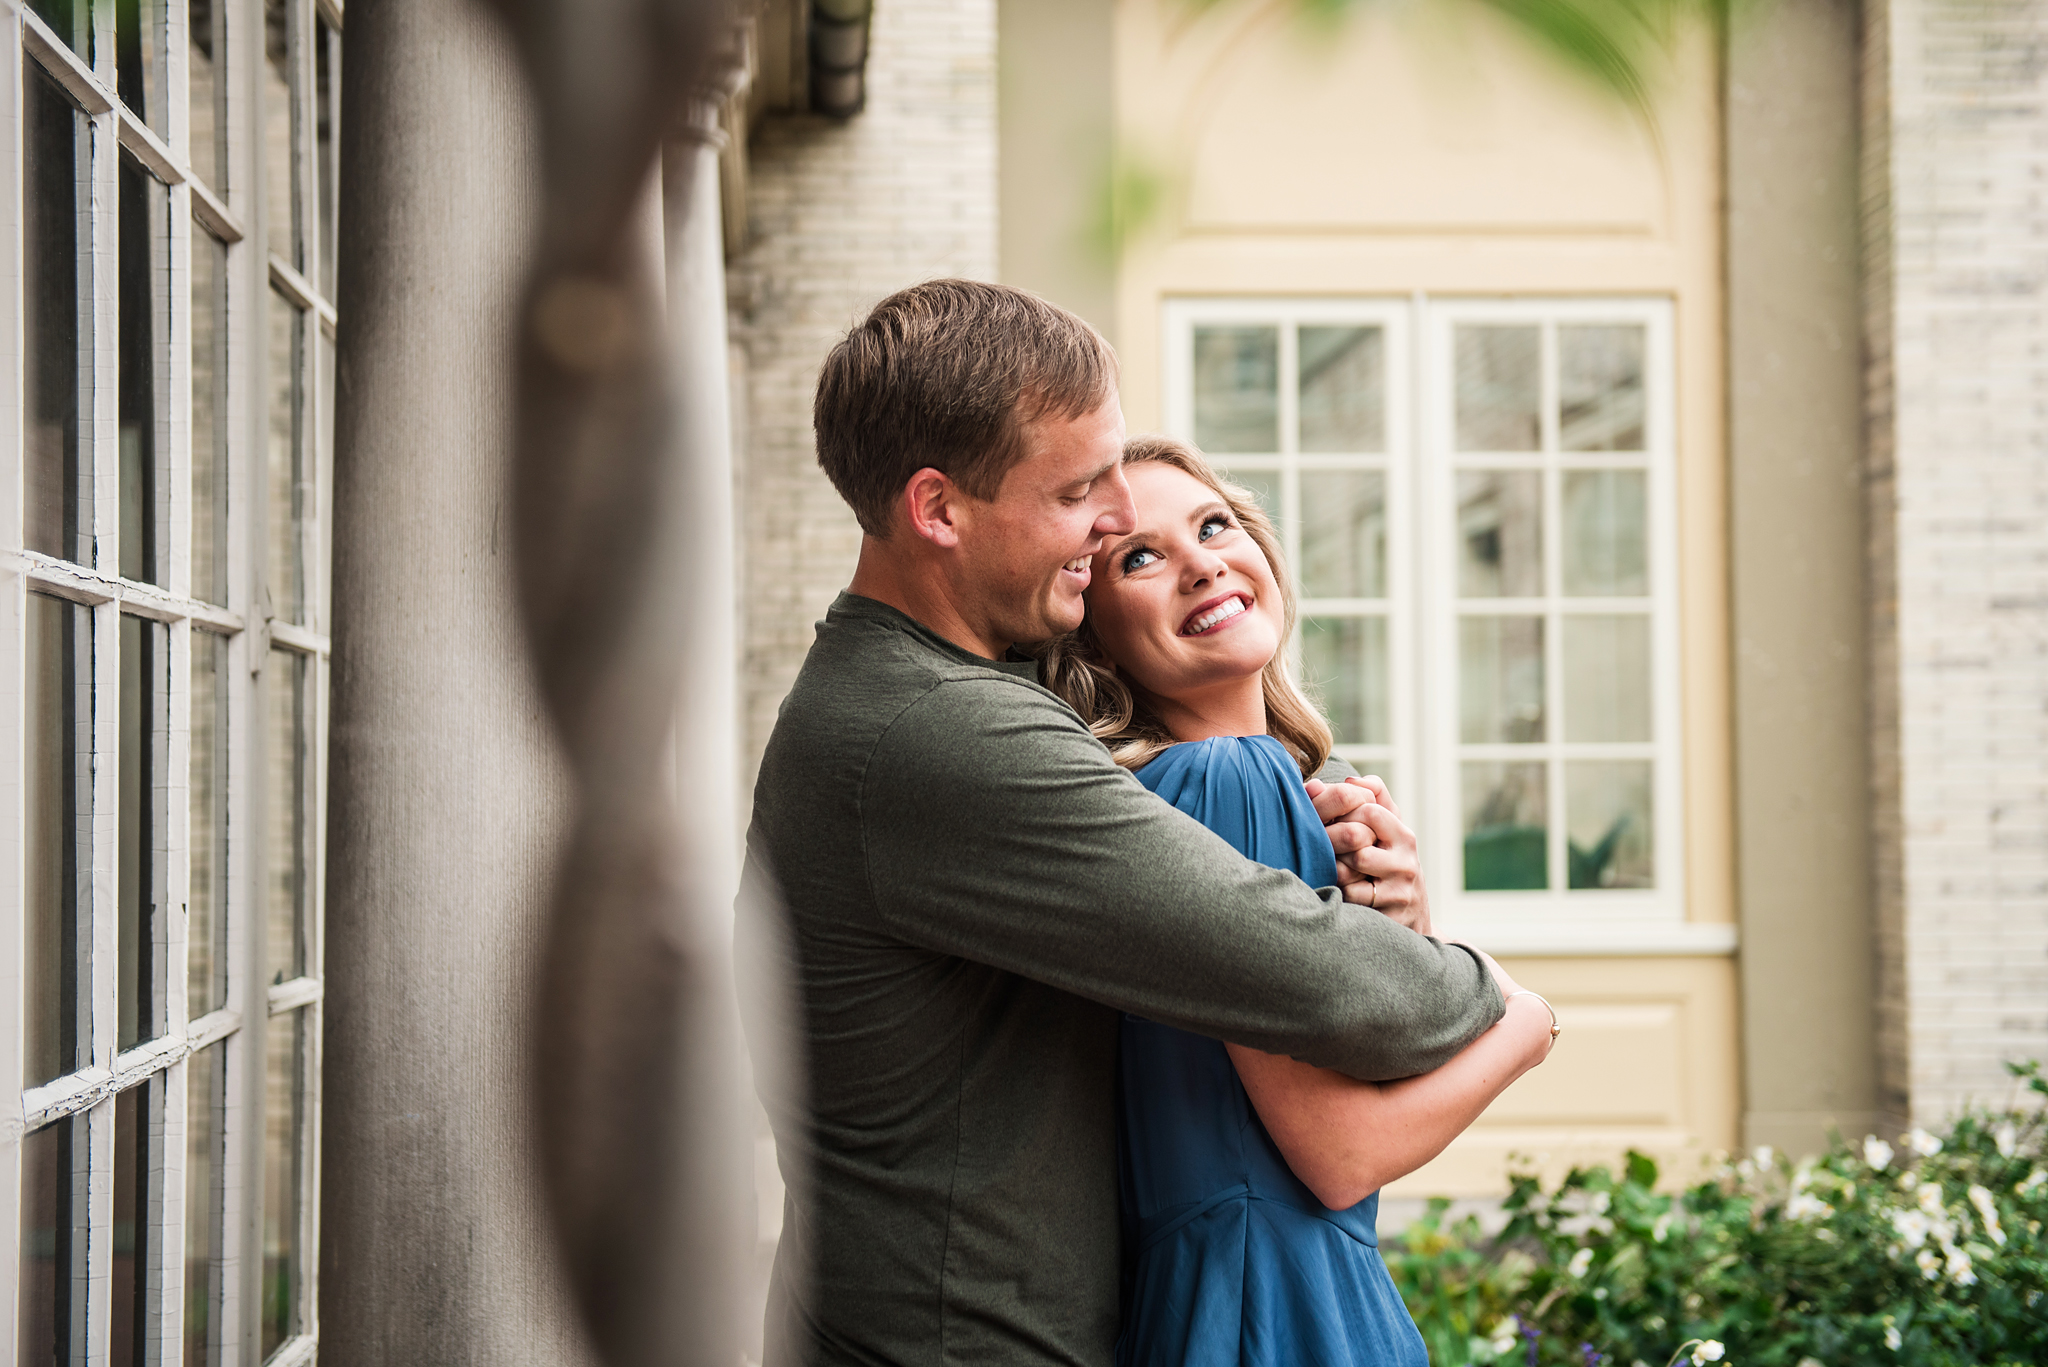 George_Eastman_House_Rochester_Yacht_Club_Rochester_Engagement_Session_JILL_STUDIO_Rochester_NY_Photographer_DSC_8075.jpg